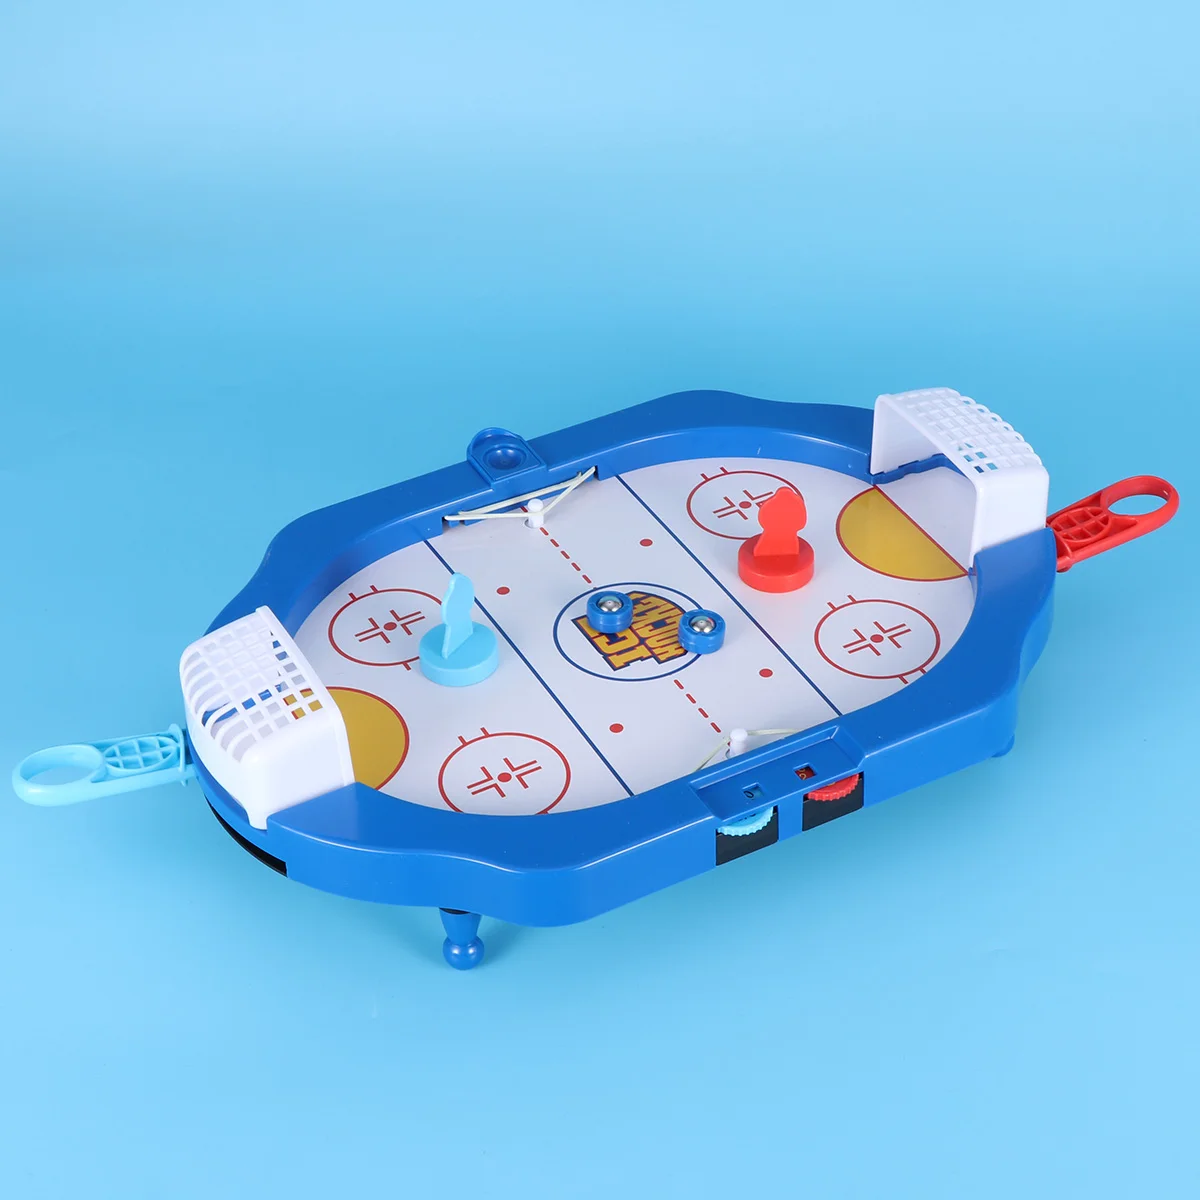 

Hockey Toy Ice Game Air Sports Mini Pushers Table Arcade Games Tabletop Desktop Interactive Parent Child Educational Early Board